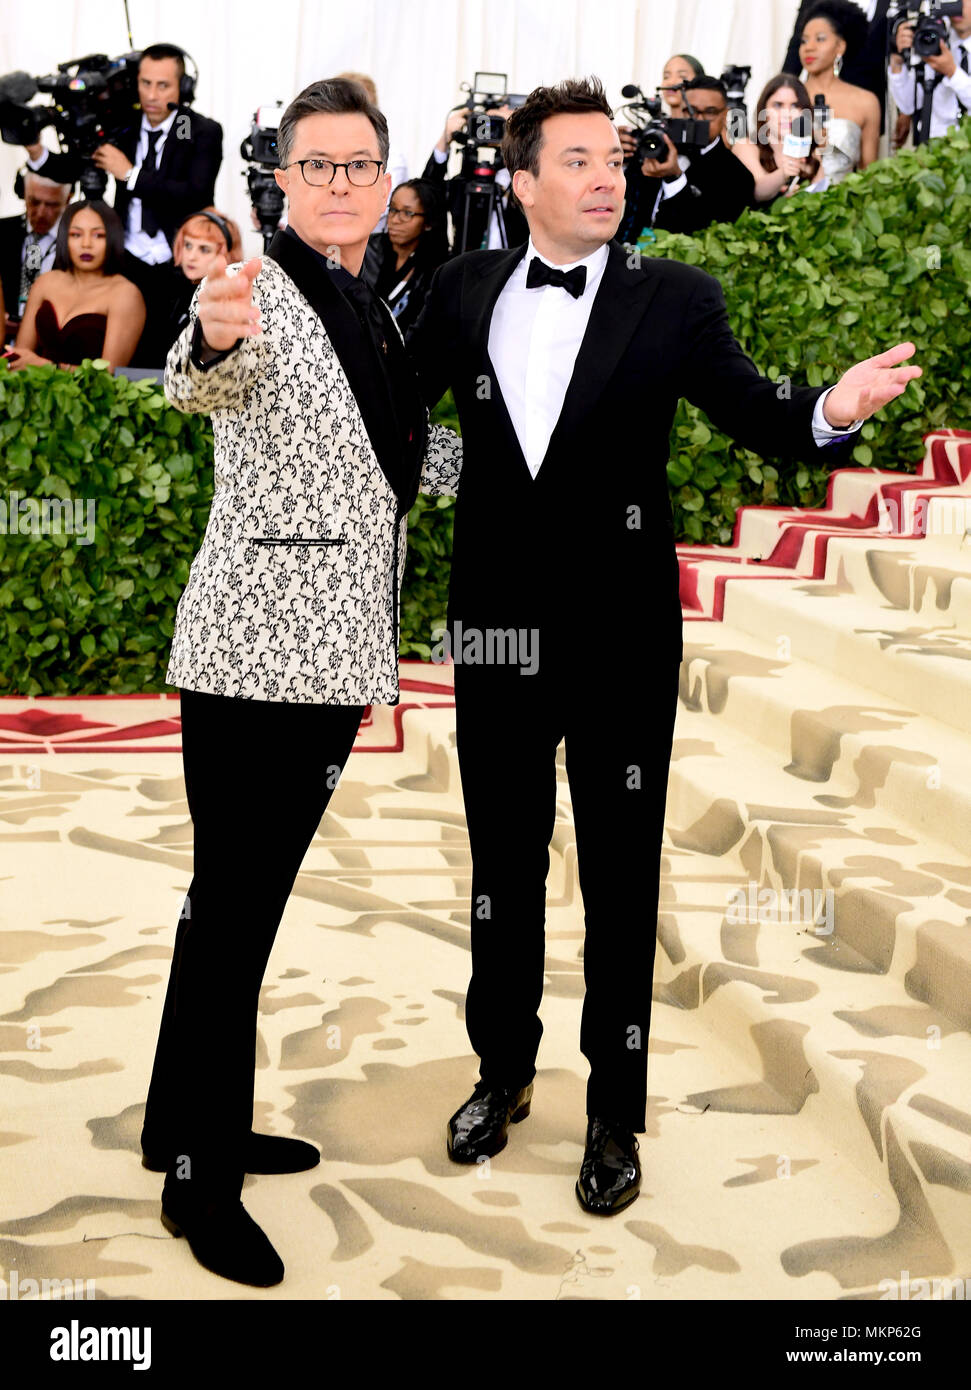 Stephen Colbert and Jimmy Fallon attending the Metropolitan Museum of Art Costume Institute Benefit Gala 2018 in New York, USA Stock Photo